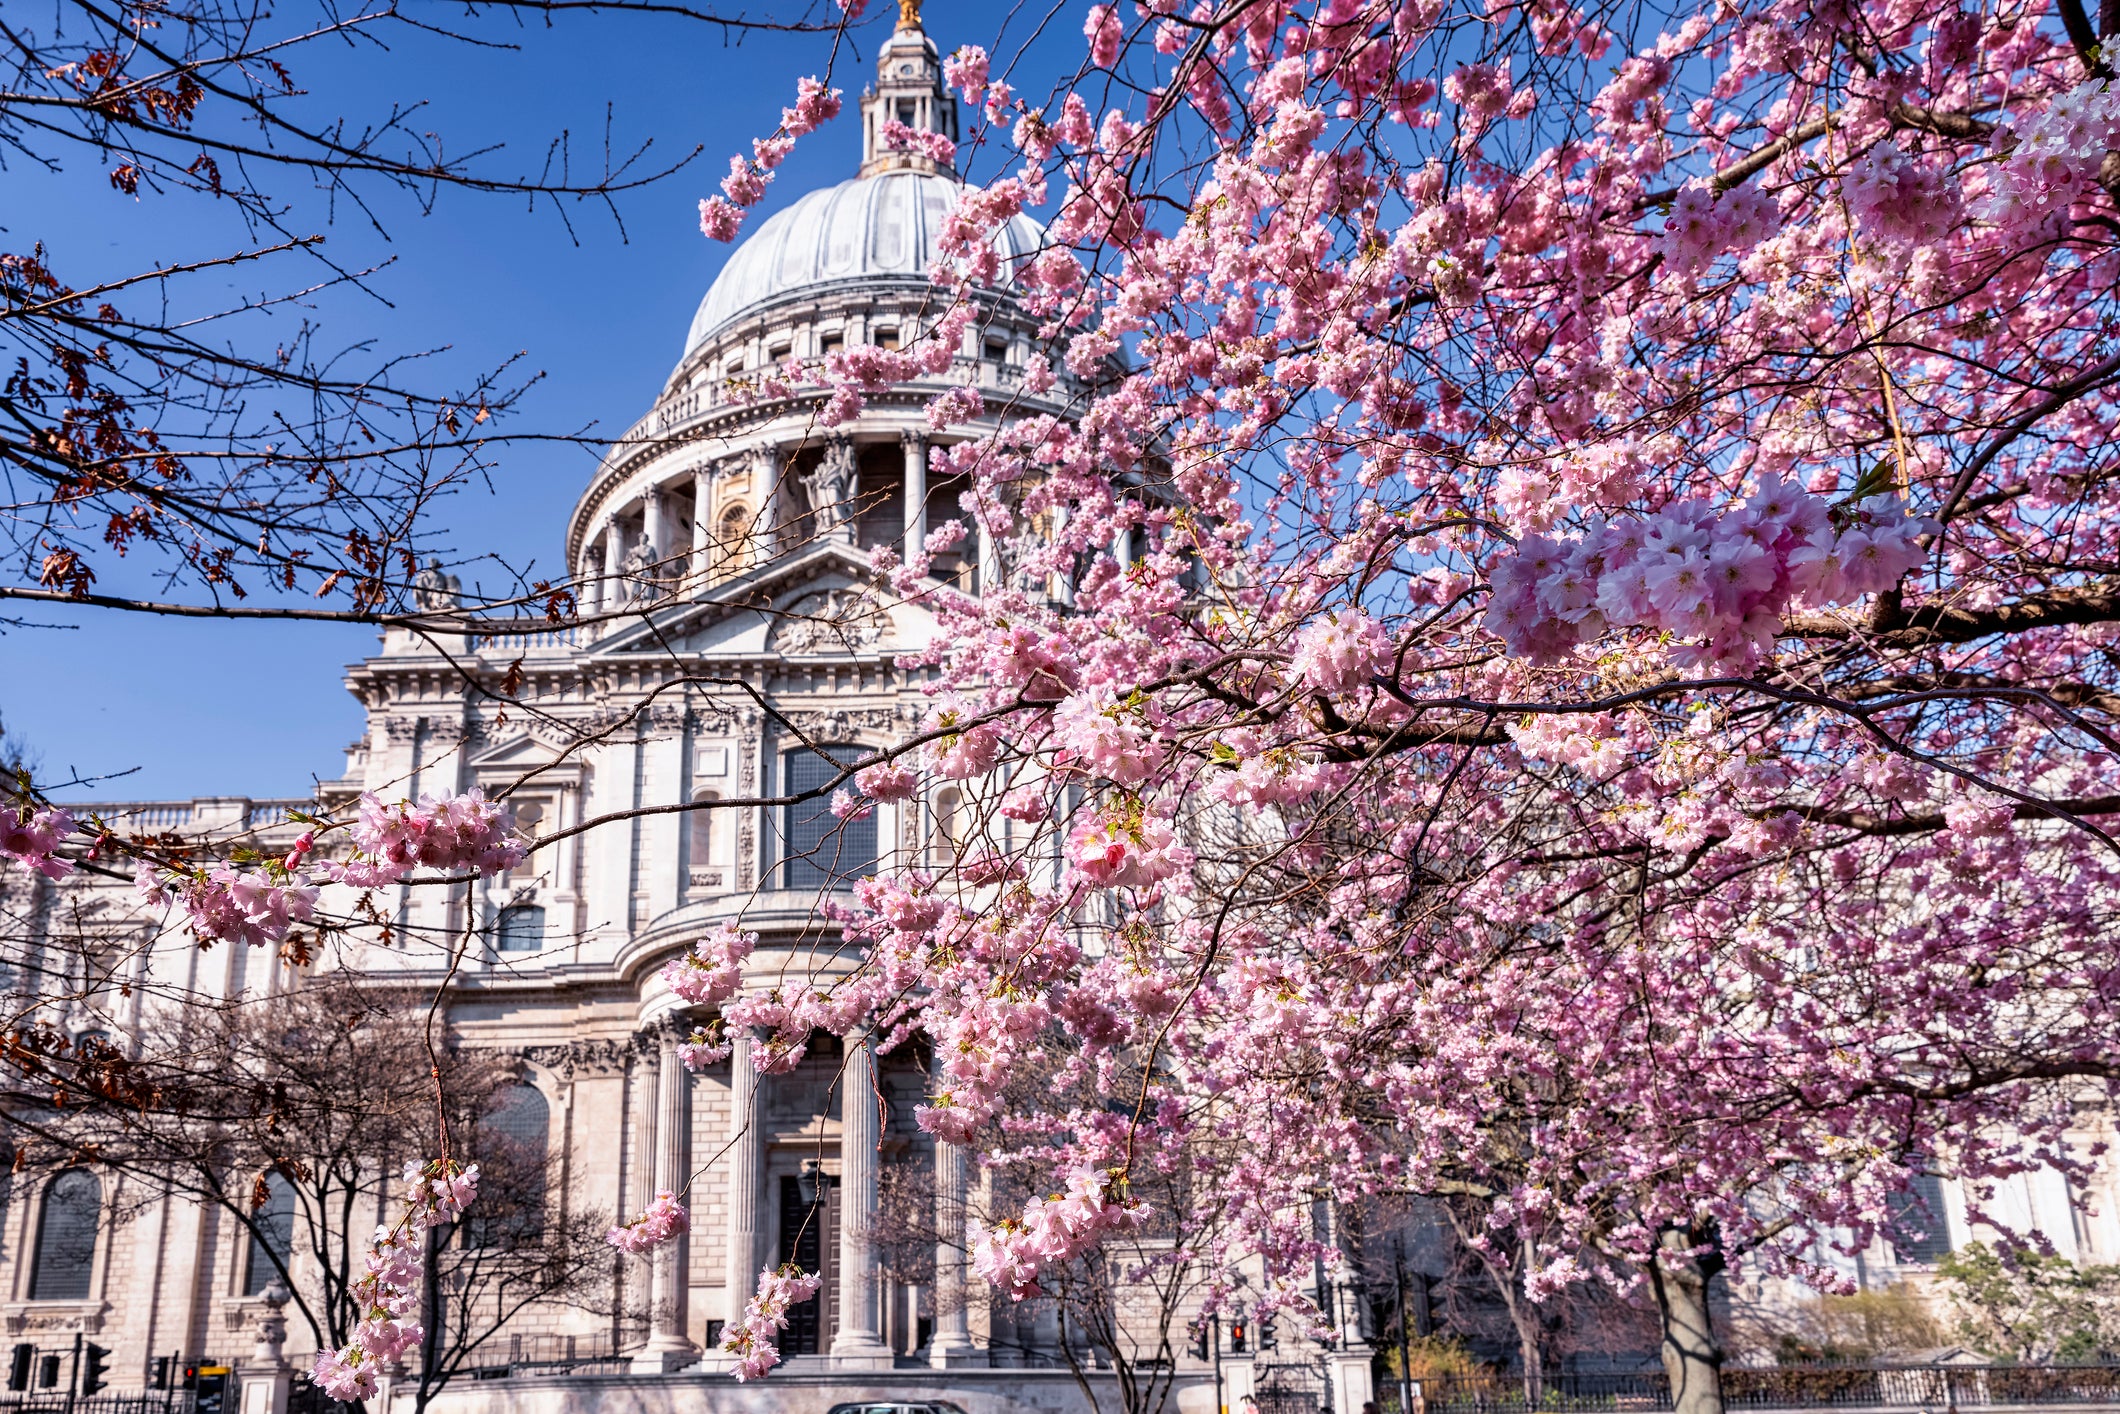 Blossom in bloom in front of London’s St Paul’s Cathedral